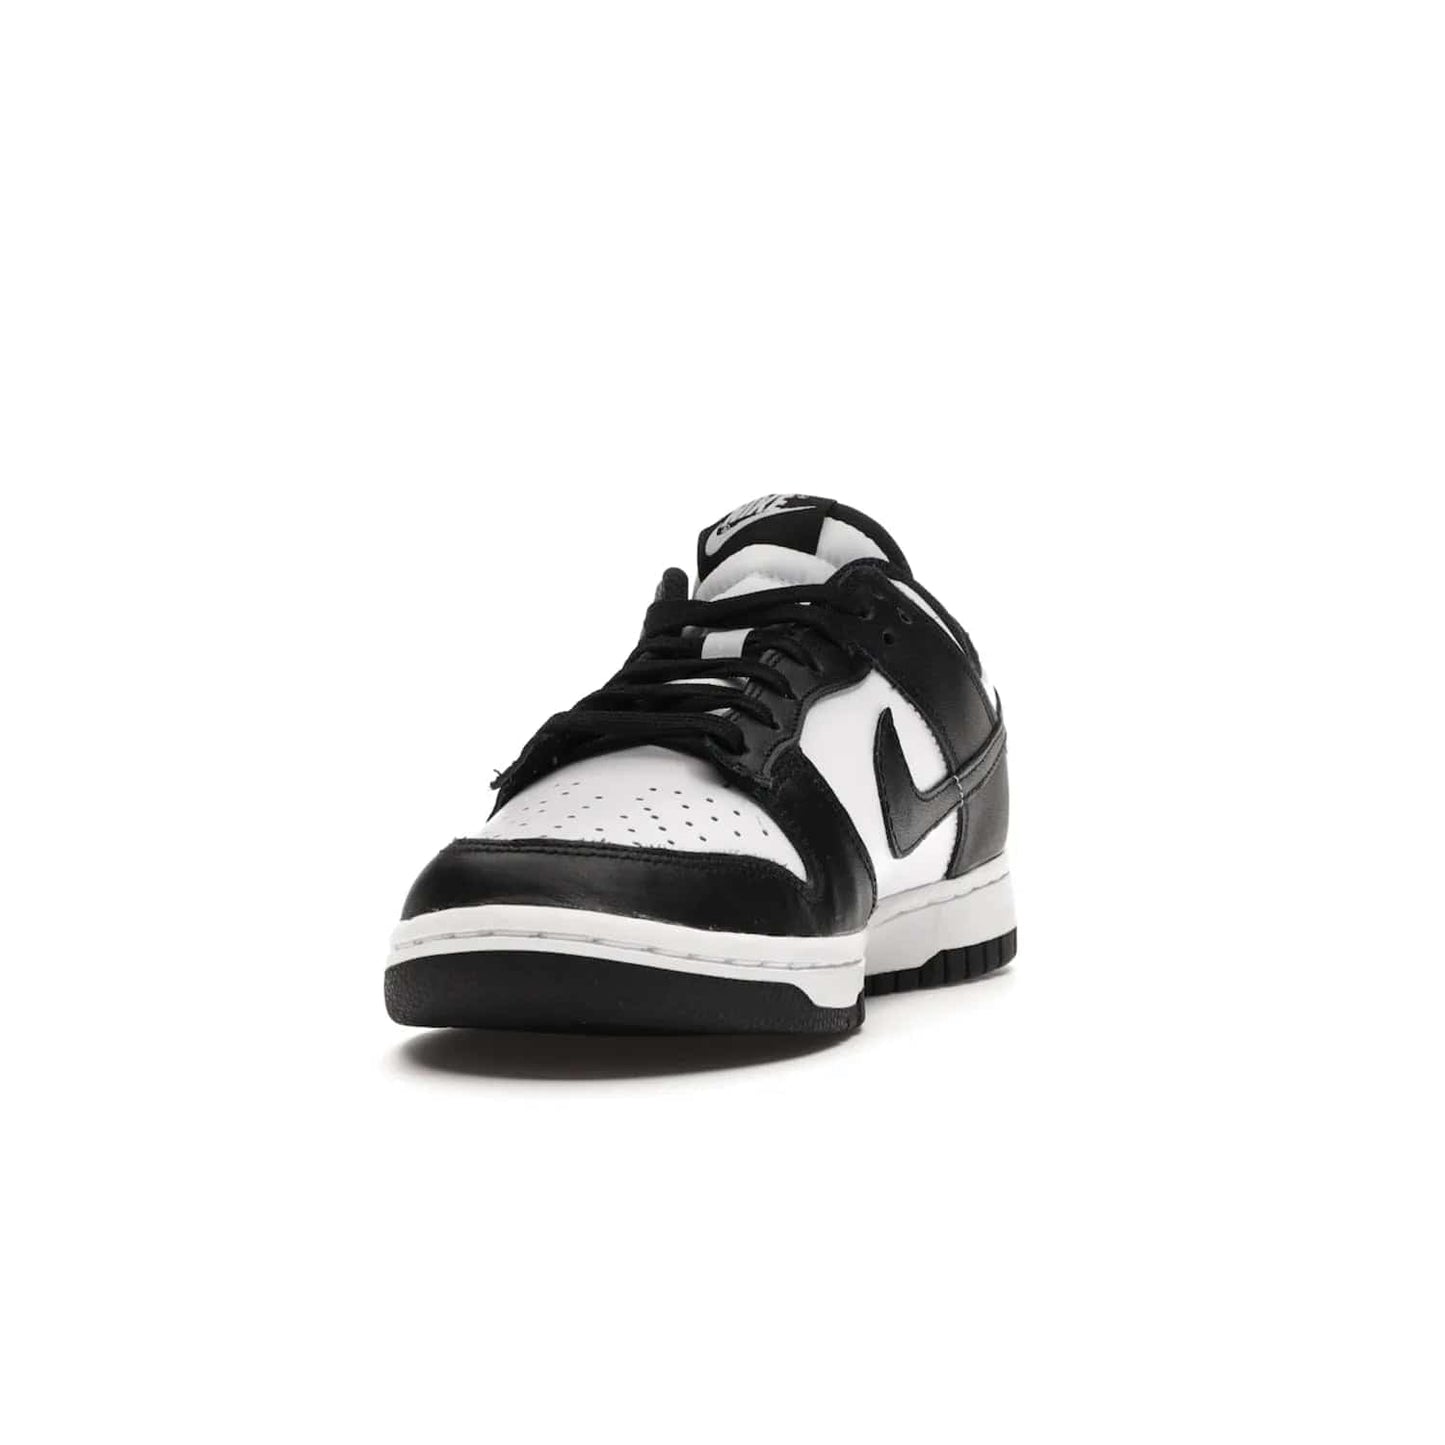 Nike Dunk Low Retro White Black Panda (2021) (Women's) - Image 12 - Only at www.BallersClubKickz.com - Say hello to the new Nike Dunk Low Retro White Black Panda (2021) (Women's)! White & black leather upper with Nike Swoosh logo. Get your pair for $100 in March 2021! Shop now!